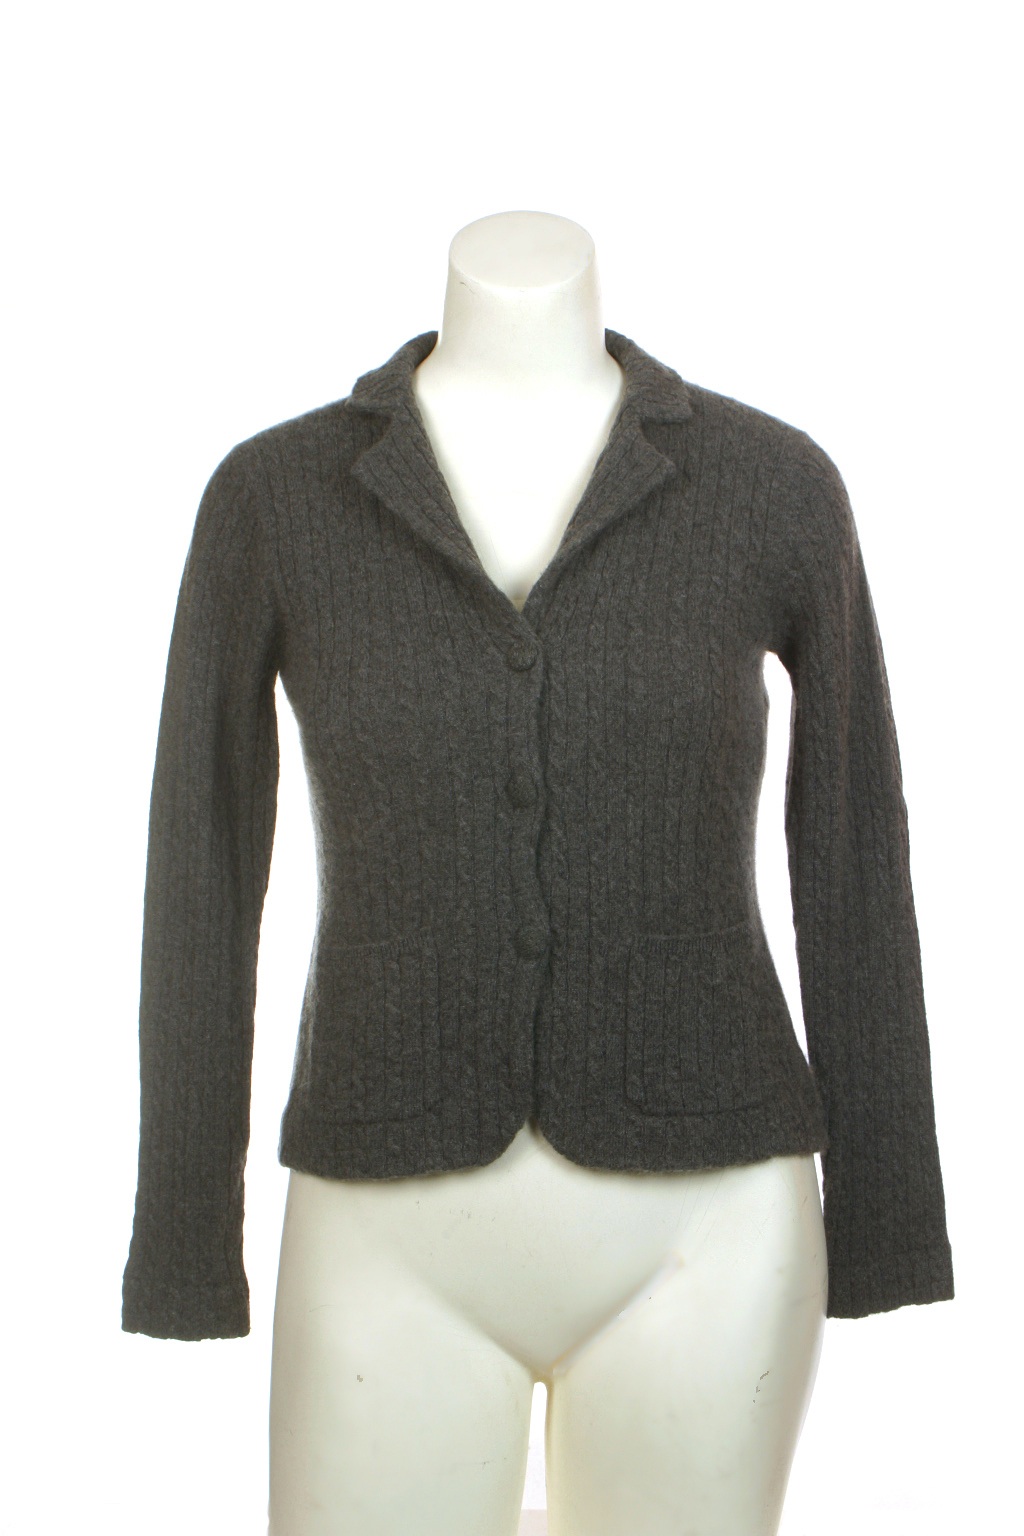 Thrift Shop Sweater Second Hand Wendy B Gray Cashmere Jacket Petite PS